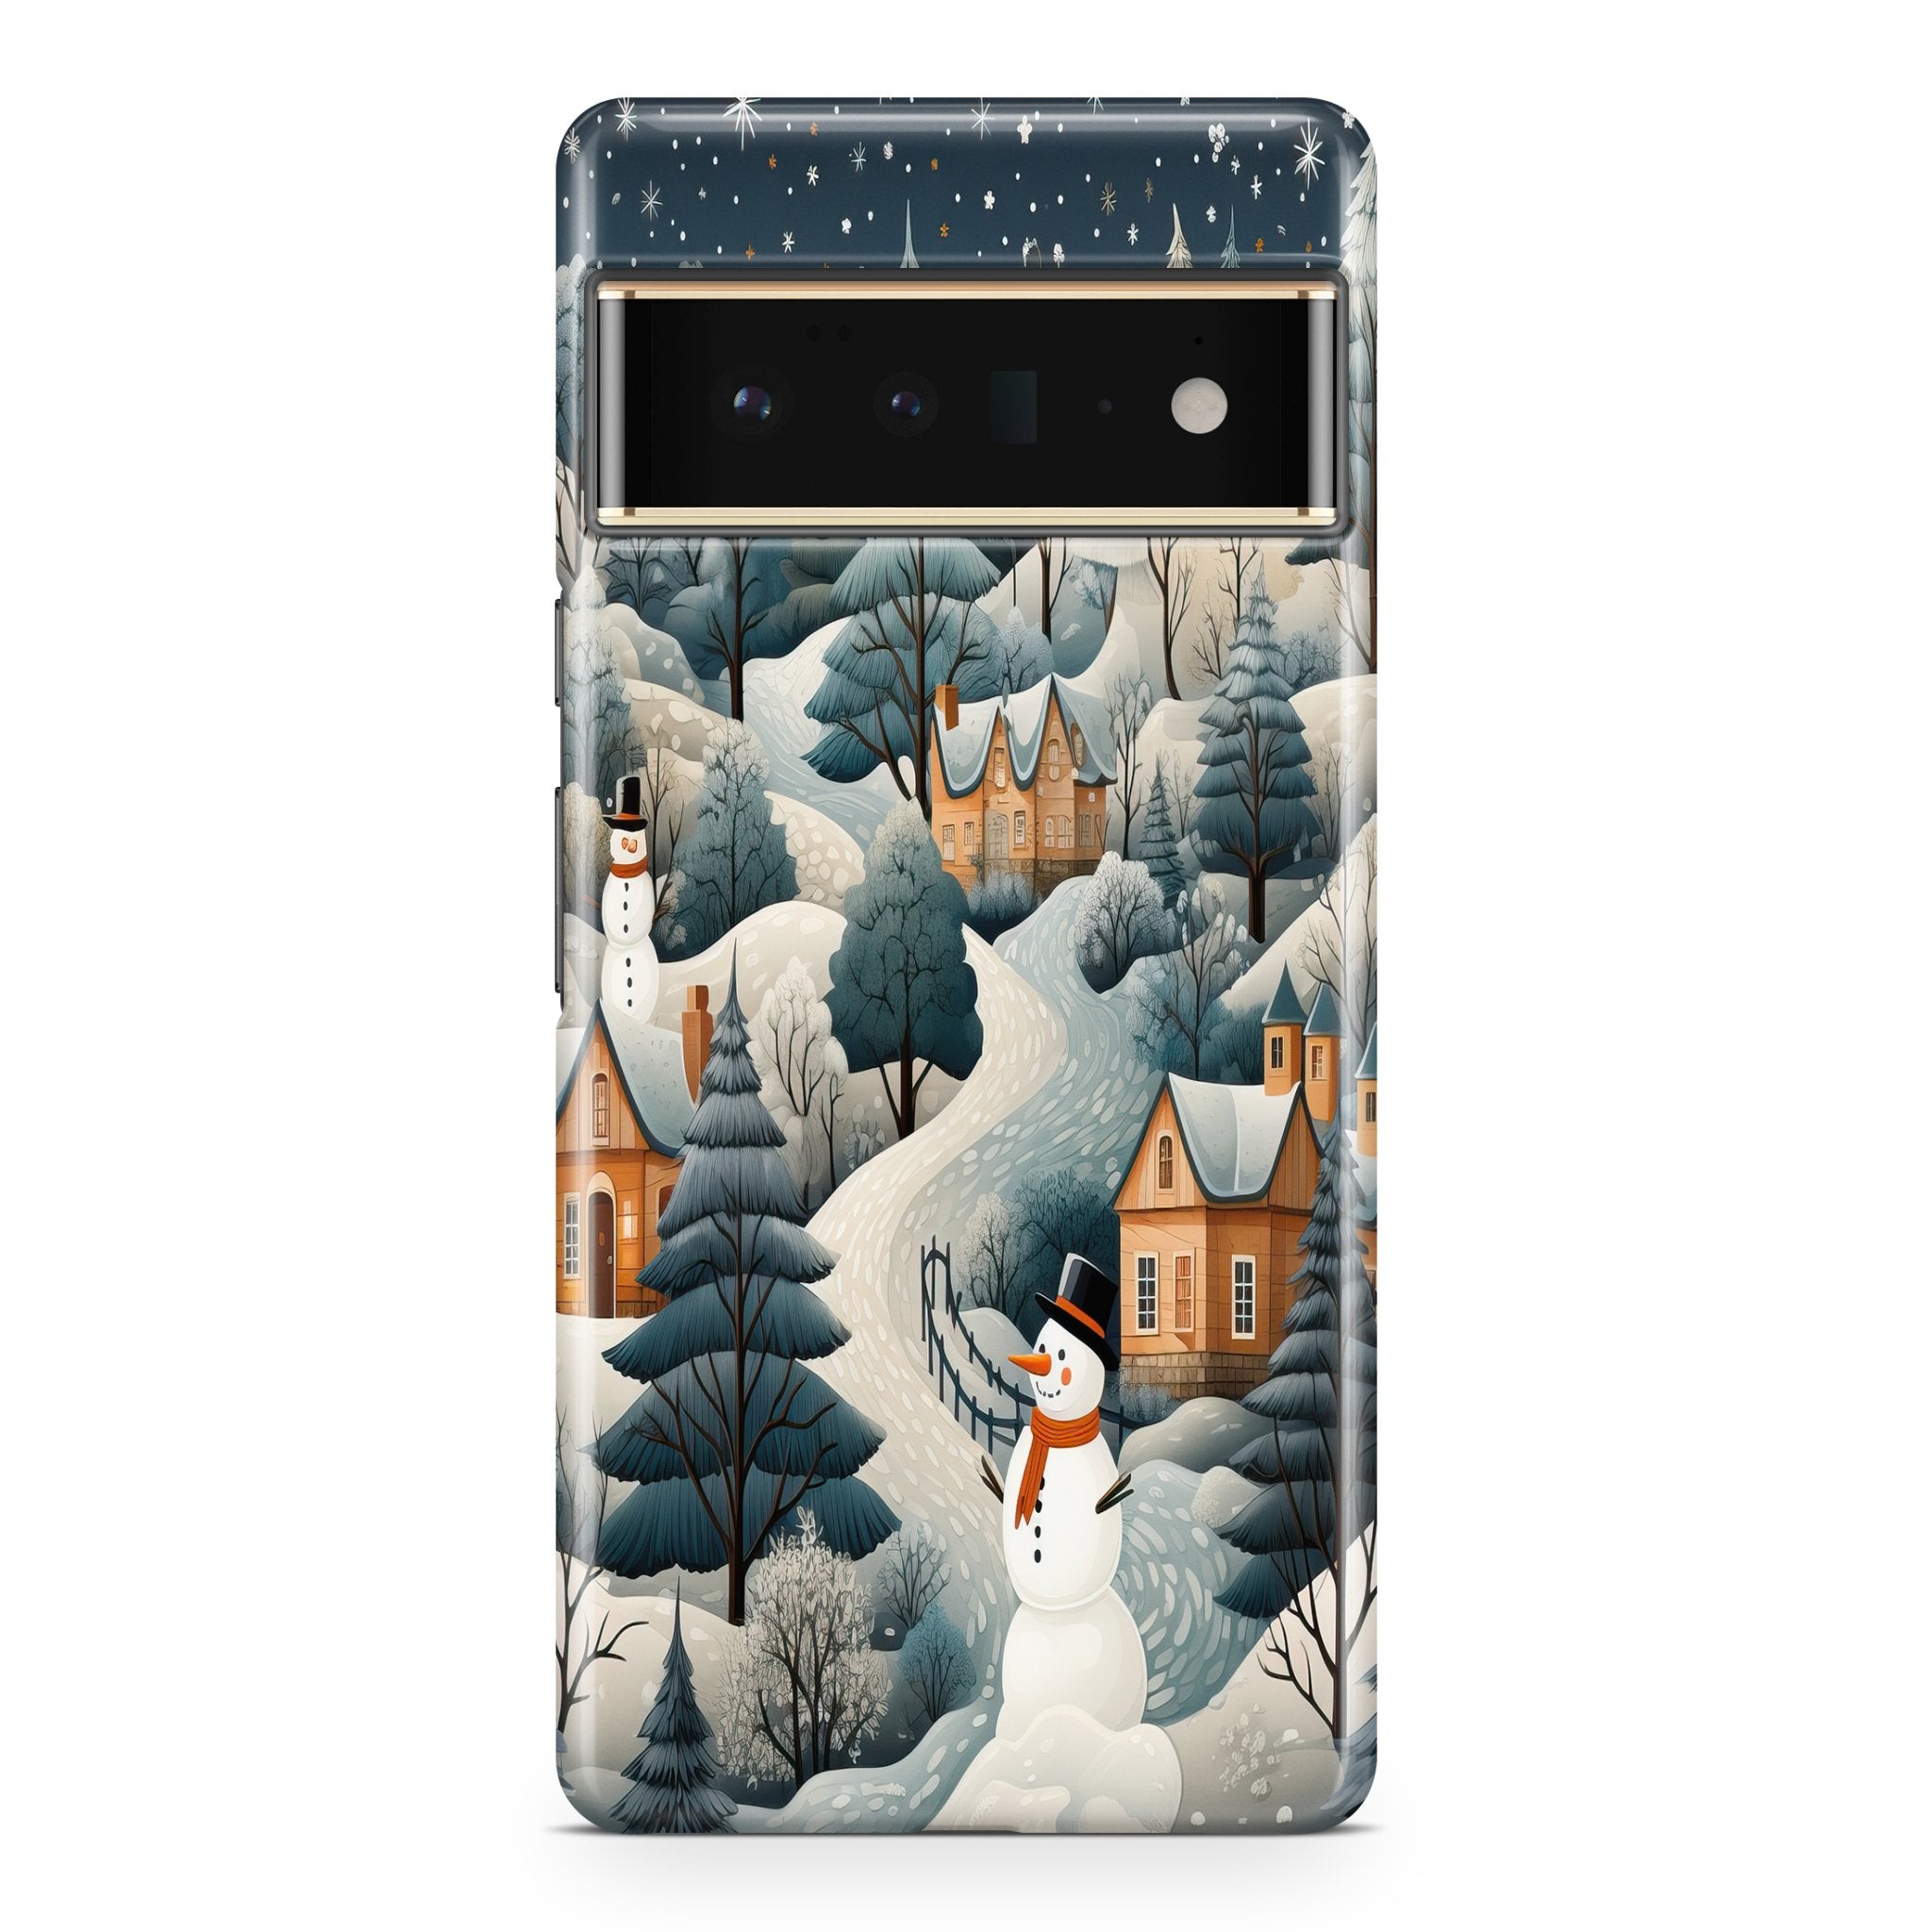 Winter Night - Google phone case designs by CaseSwagger